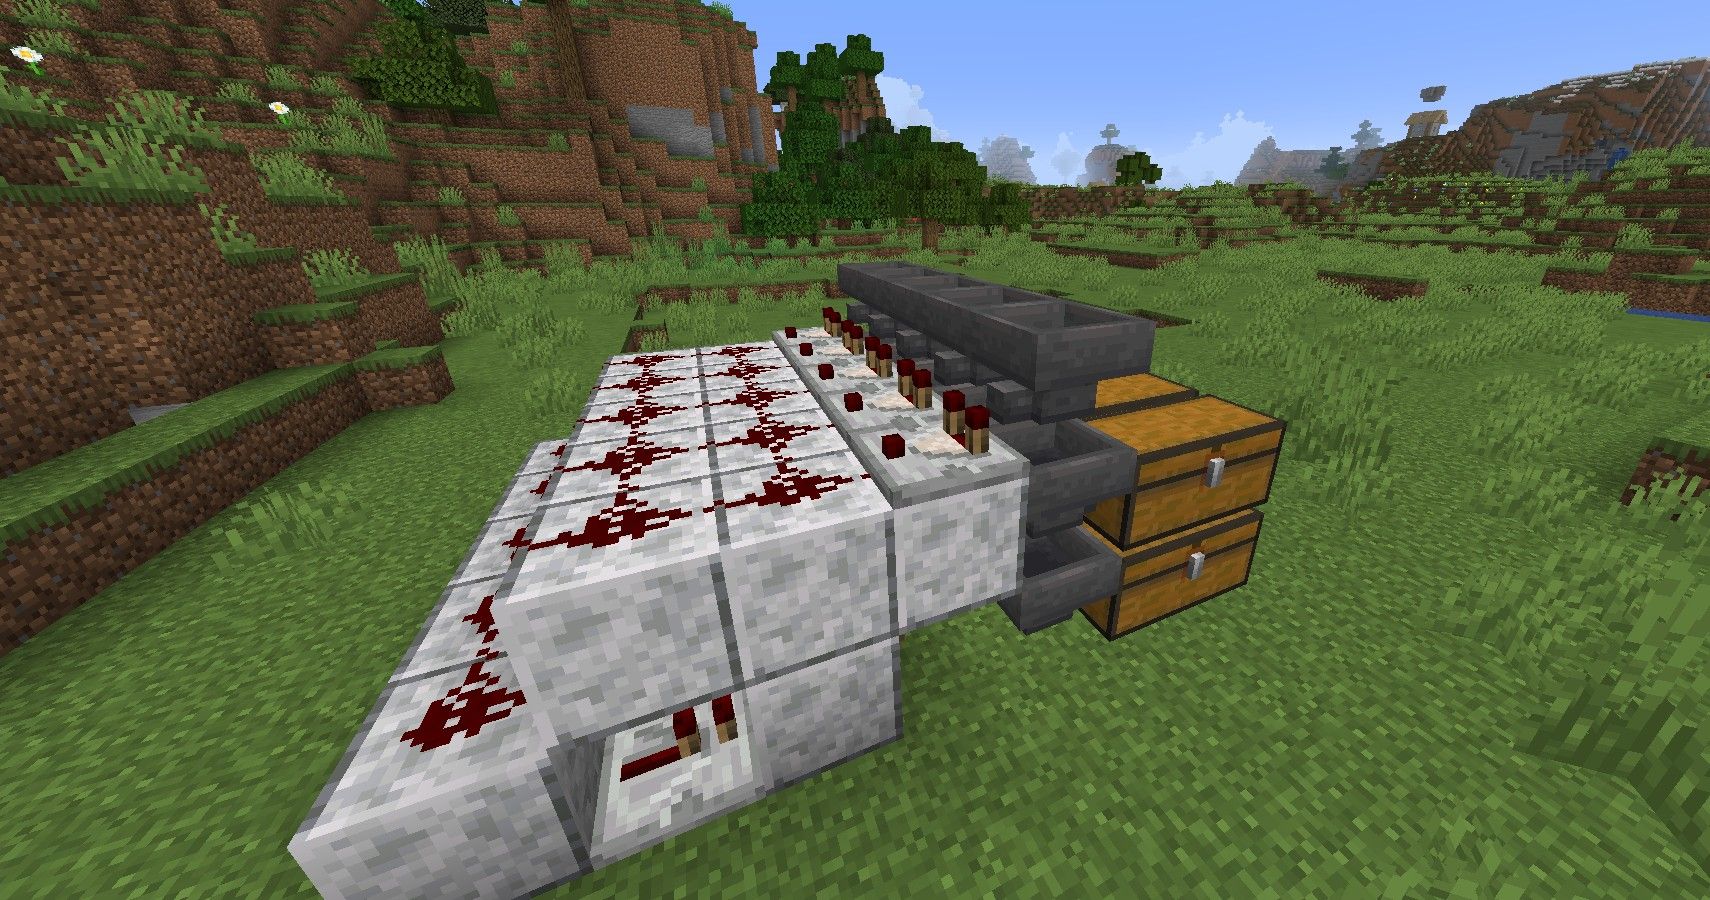 How to turn off a redstone torch